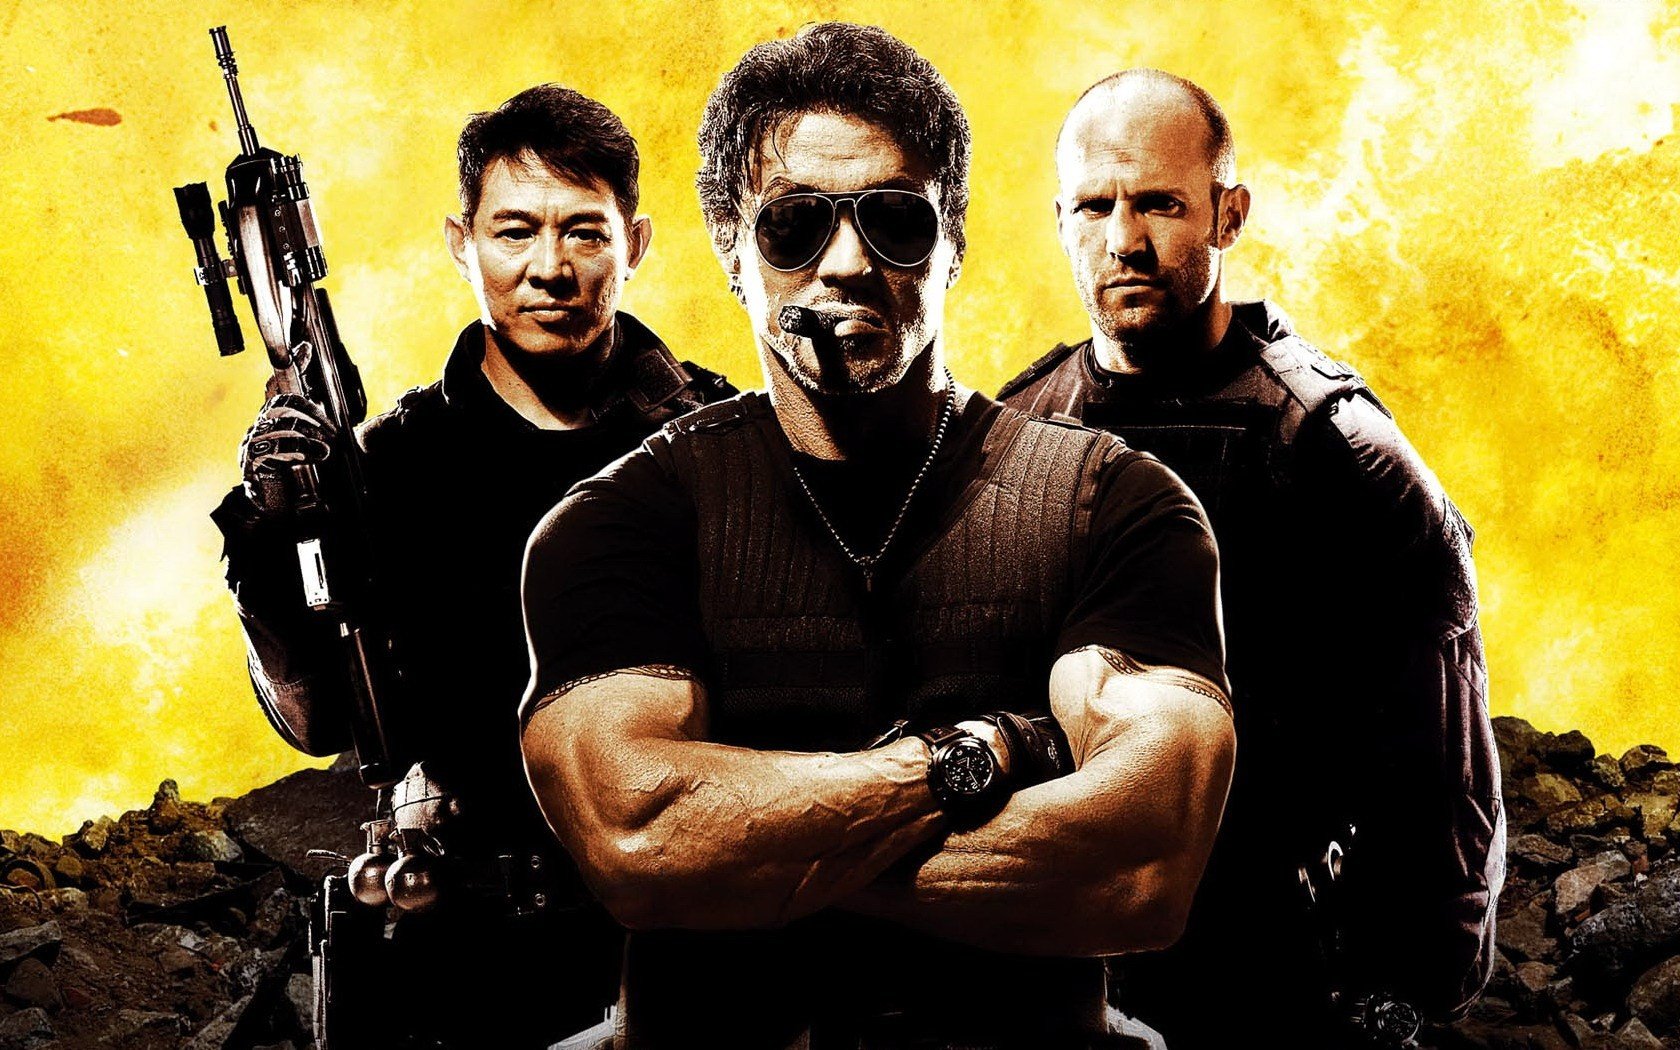 Download hd 1680x1050 The Expendables PC wallpaper ID:6960 for free